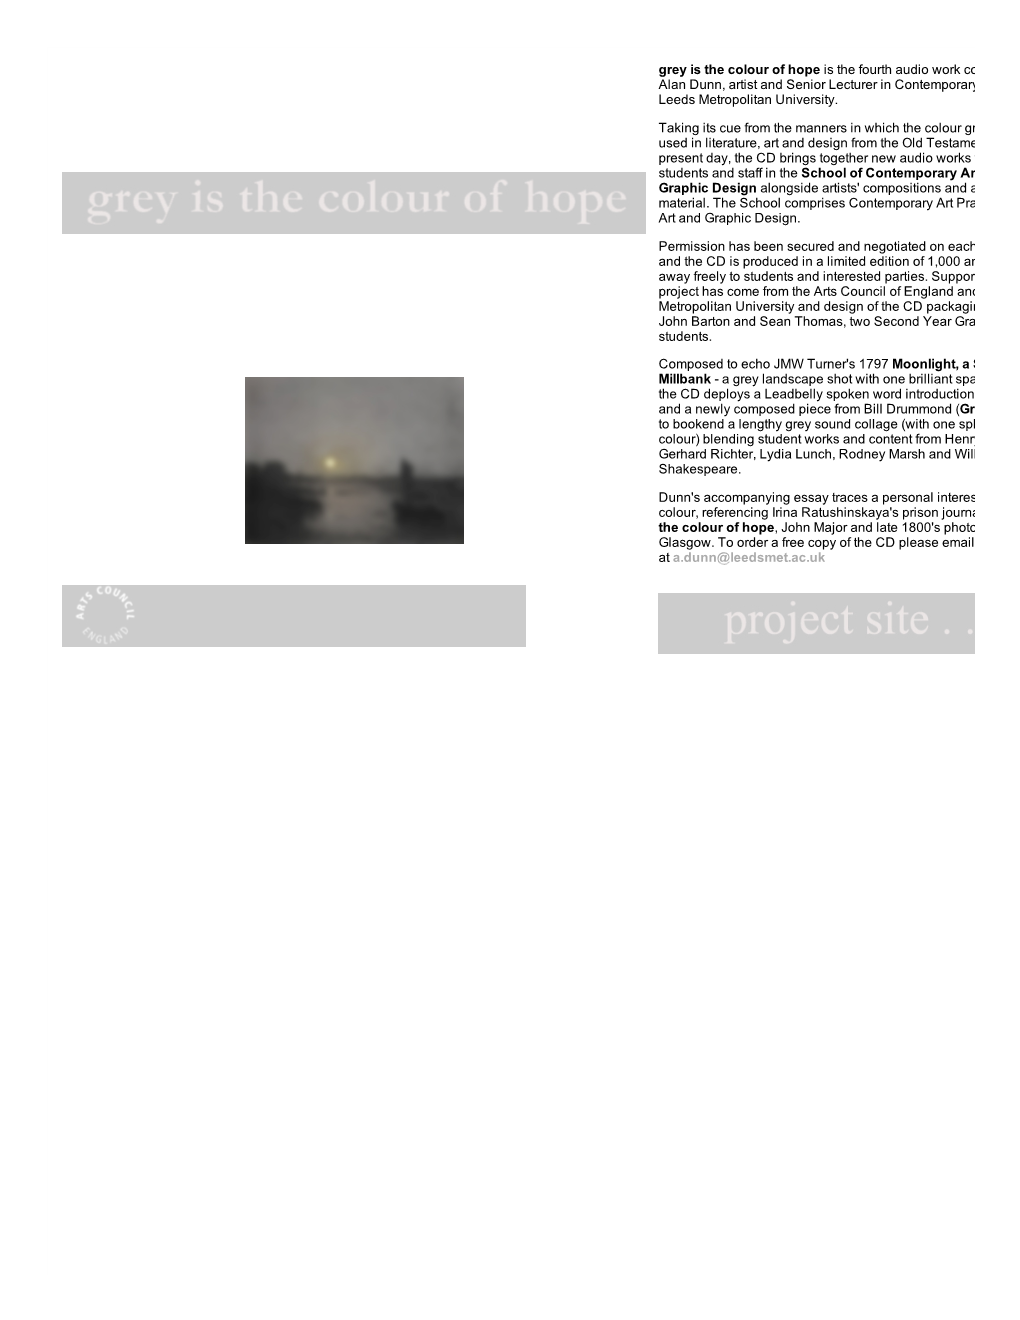 Grey Is the Colour of Hope Is the Fourth Audio Work Compiled by Alan Dunn, Artist and Senior Lecturer in Contemporary Art at Leeds Metropolitan University